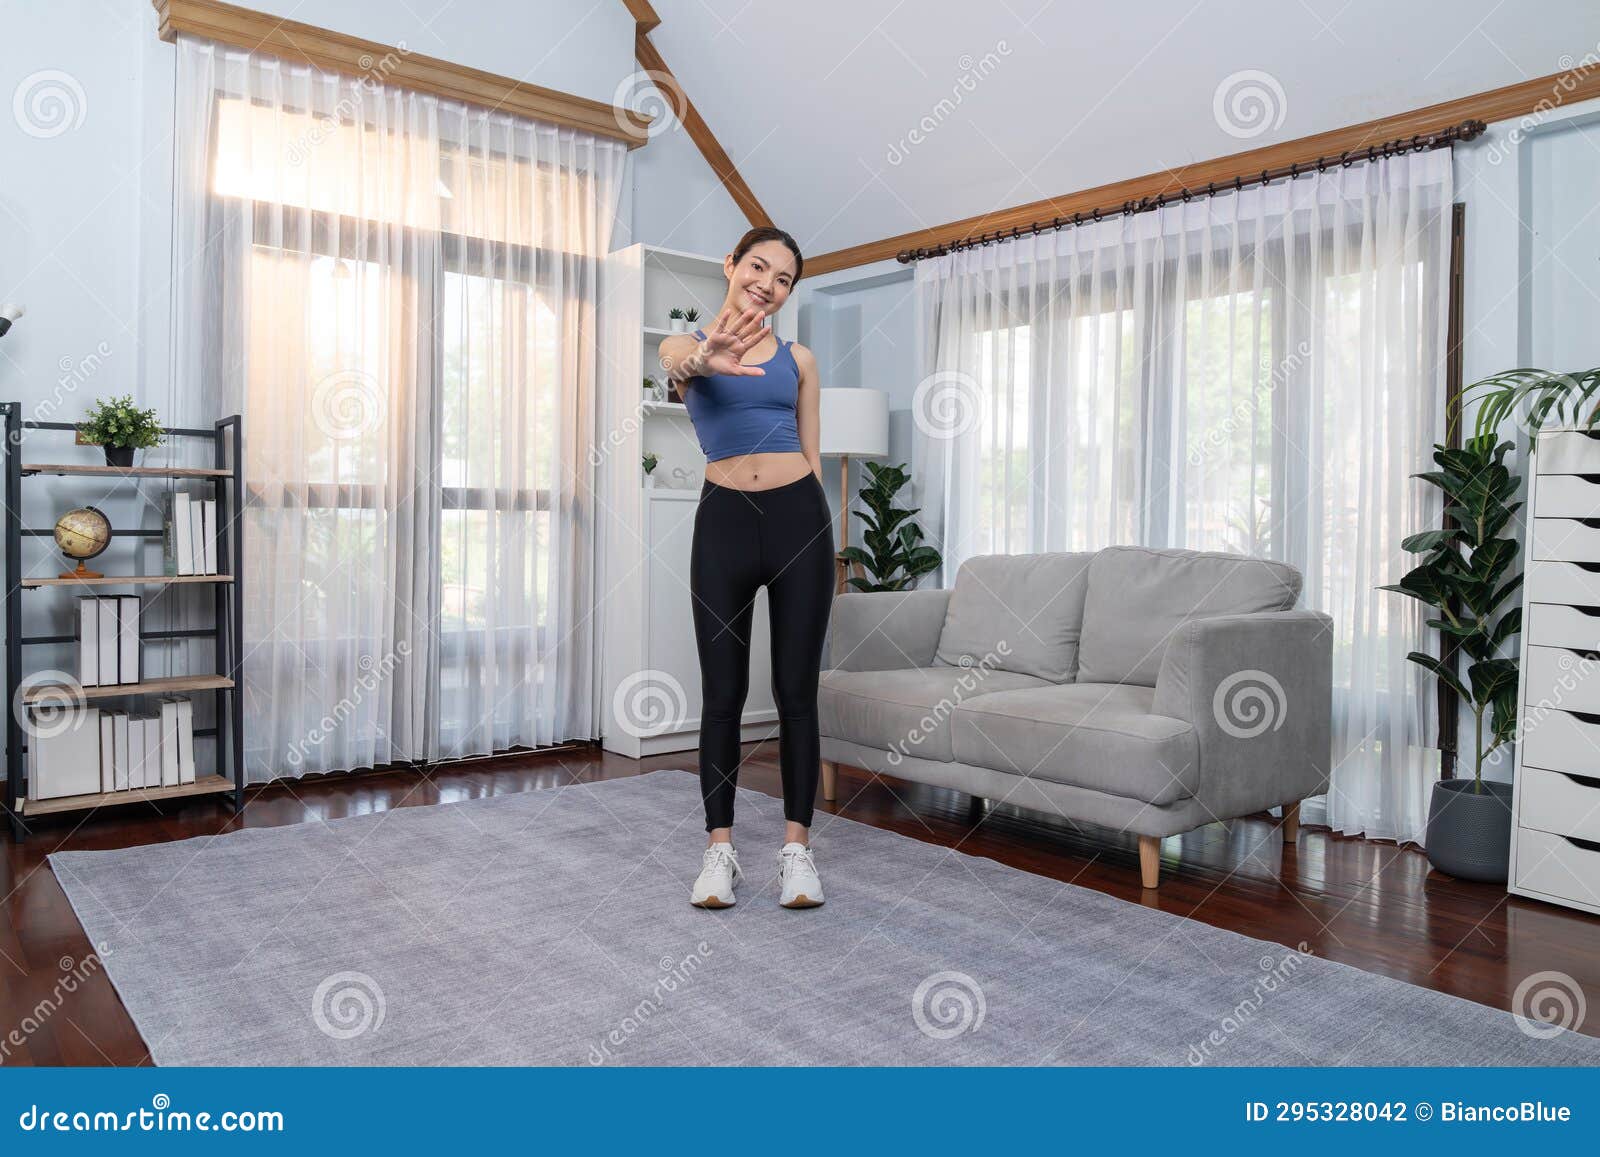 Full Body Attractive Girl Engage In Her Pursuit Of Healthy Lifestyle